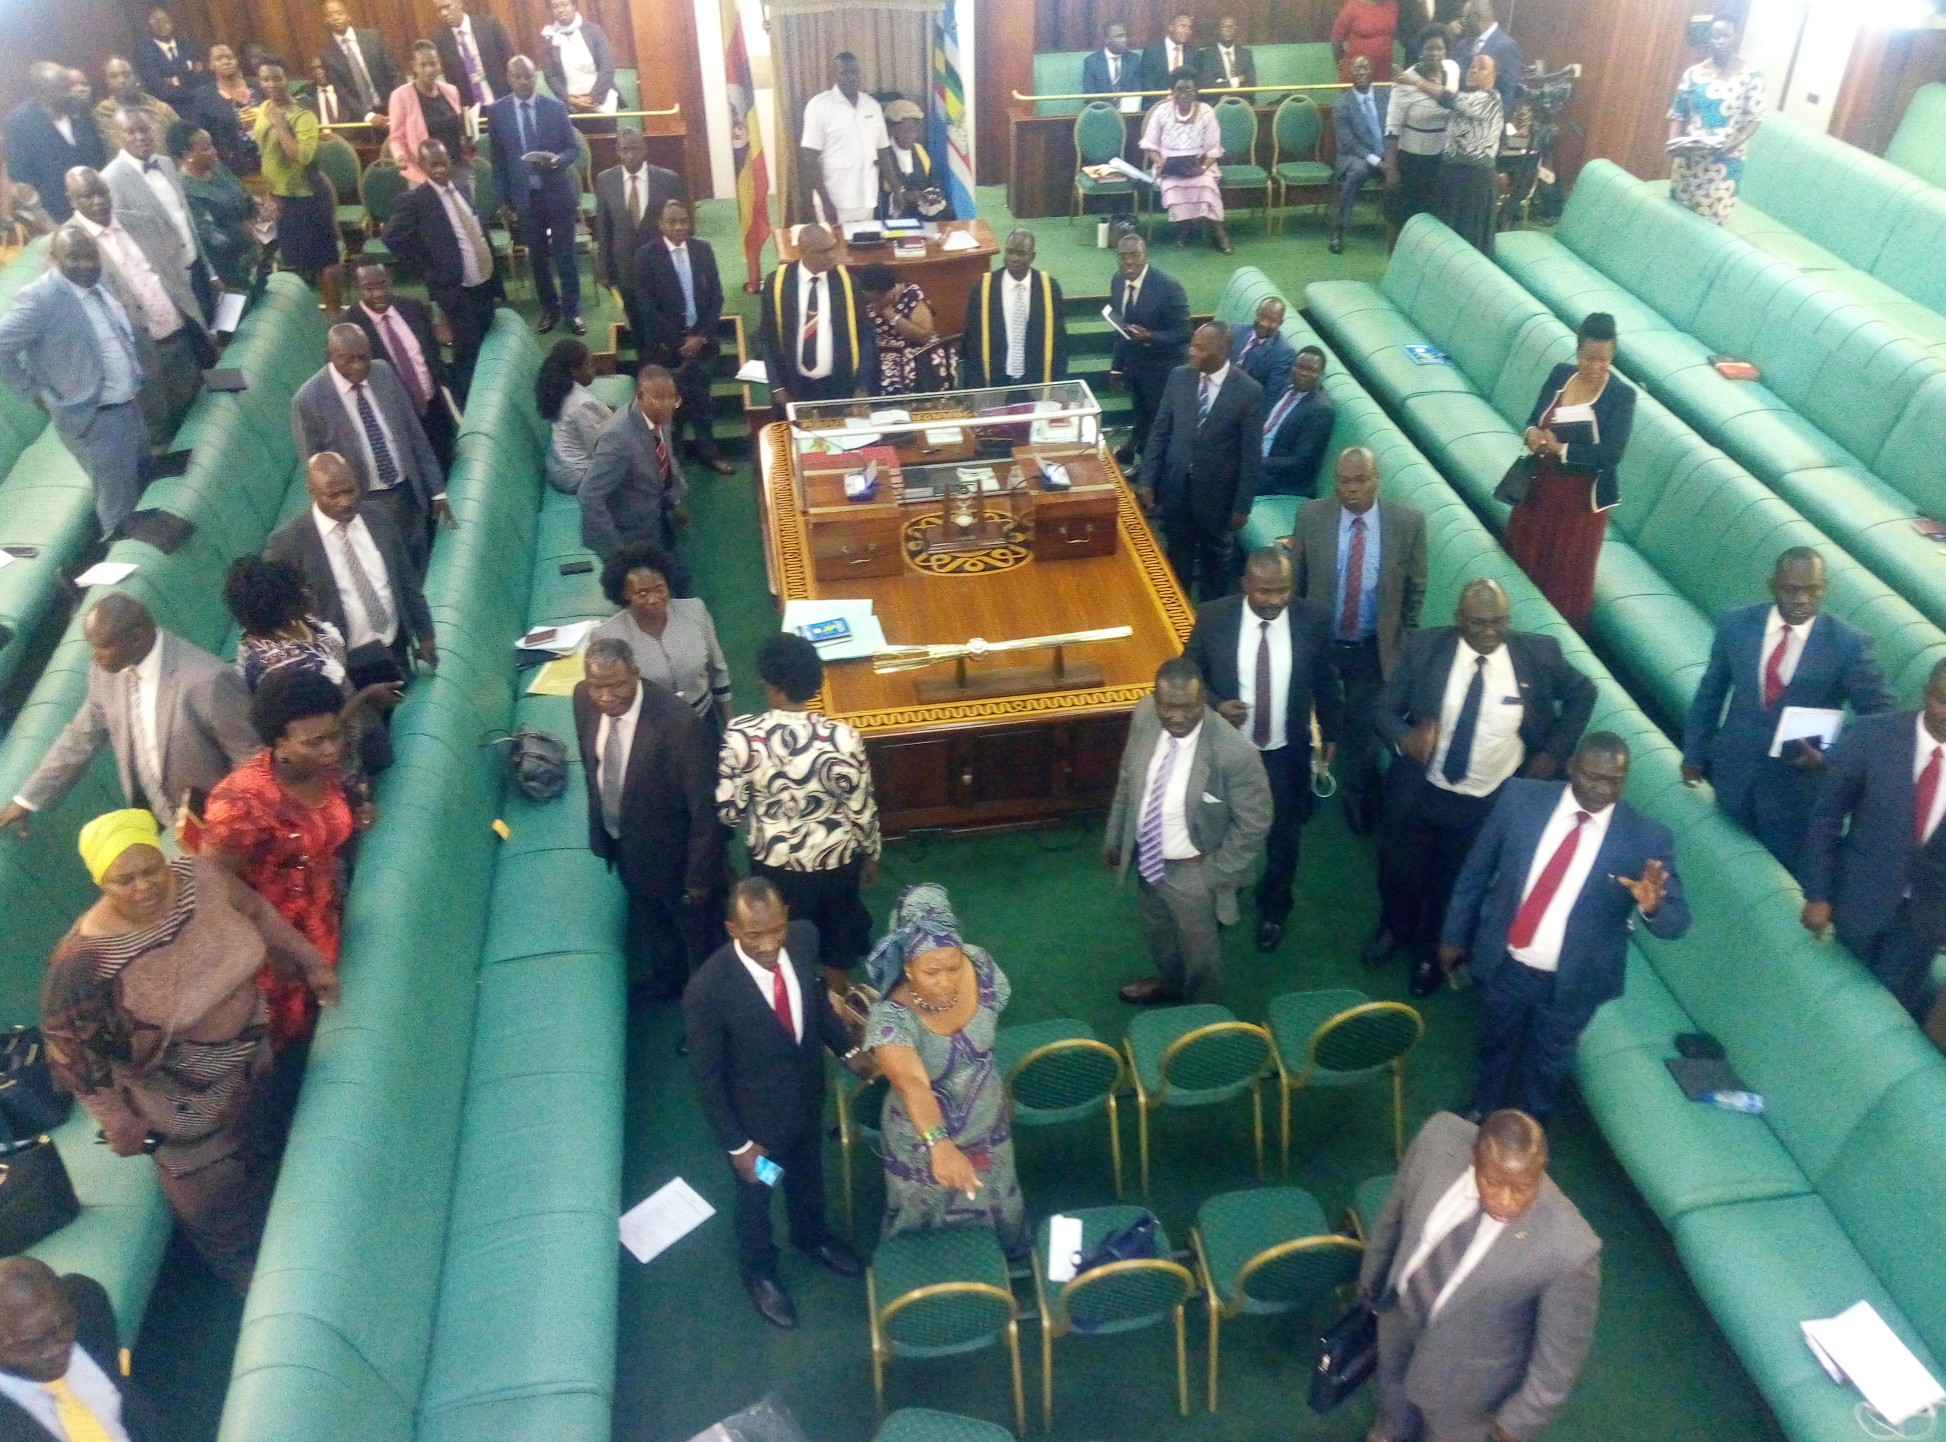 MPs were left in fear after the attack